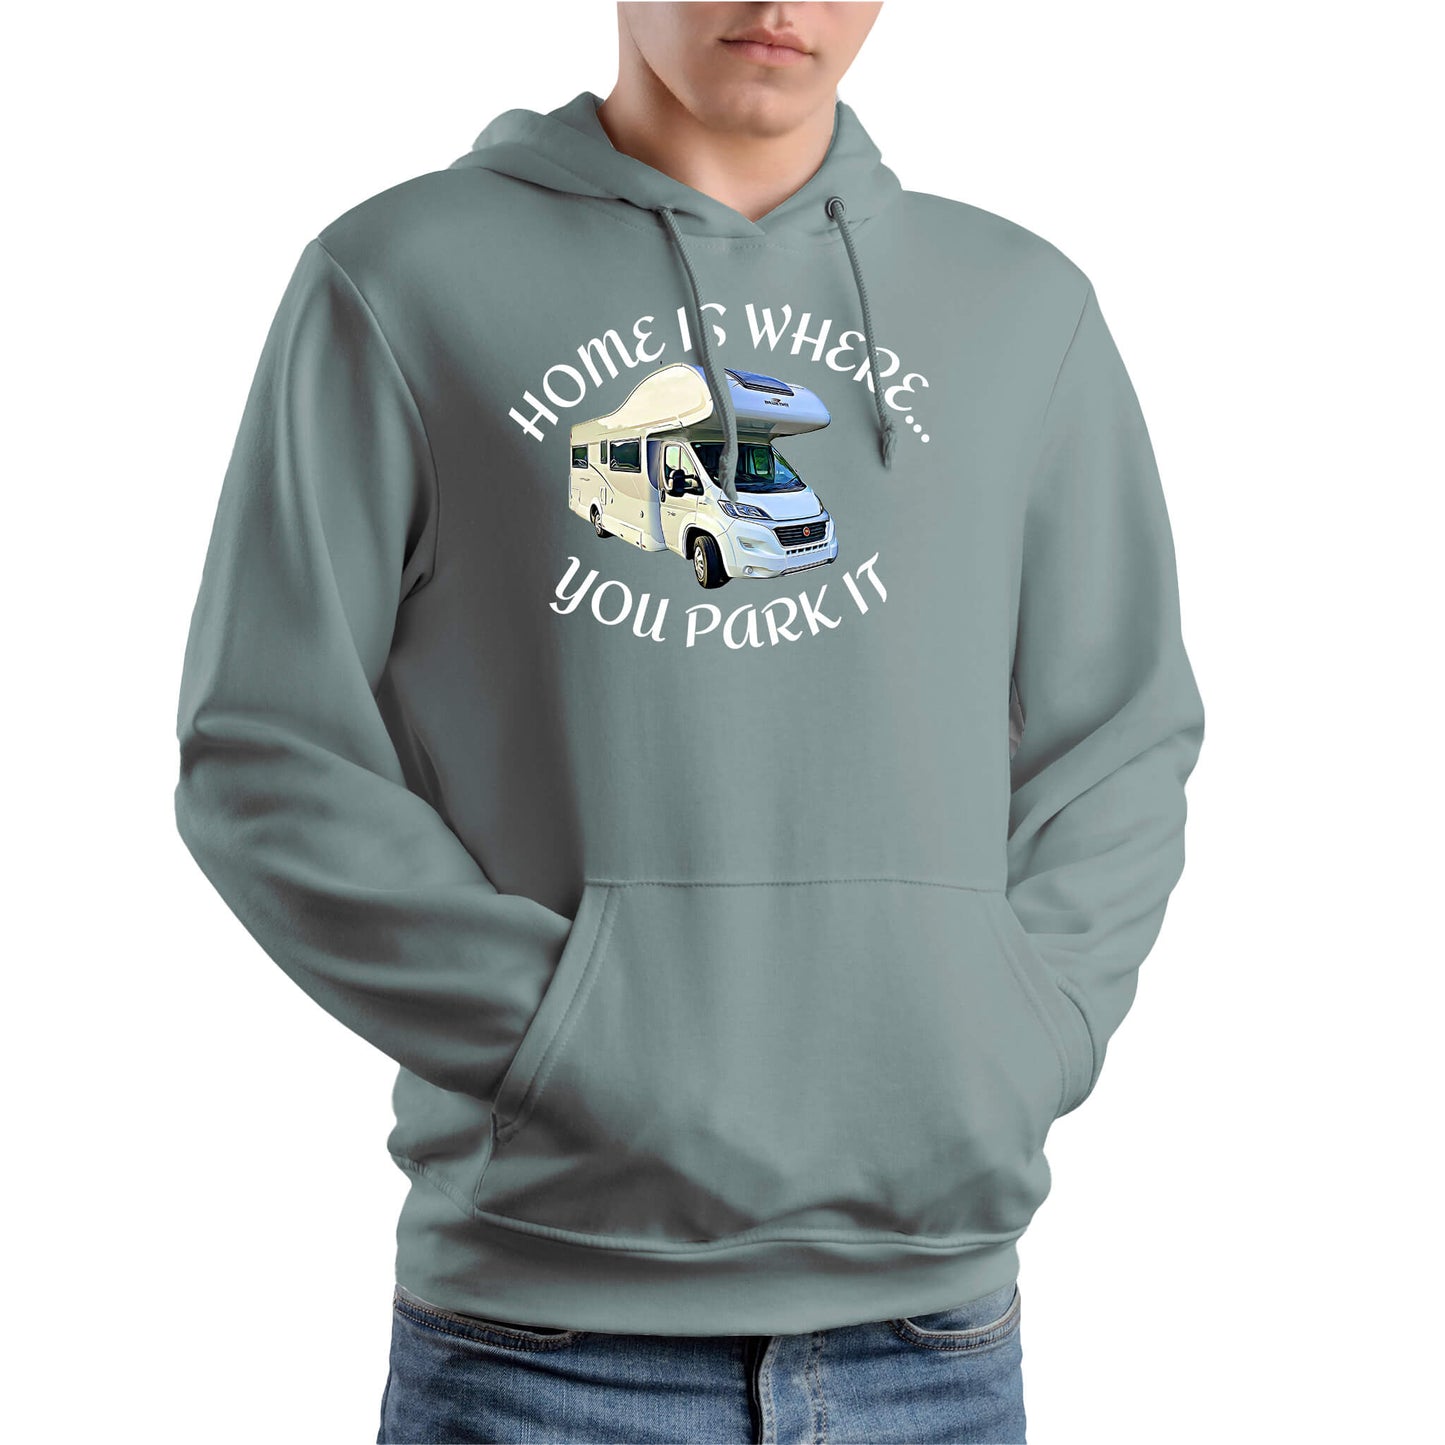 HOME IS WHERE YOU PARK IT MOTORHOME HOODIE